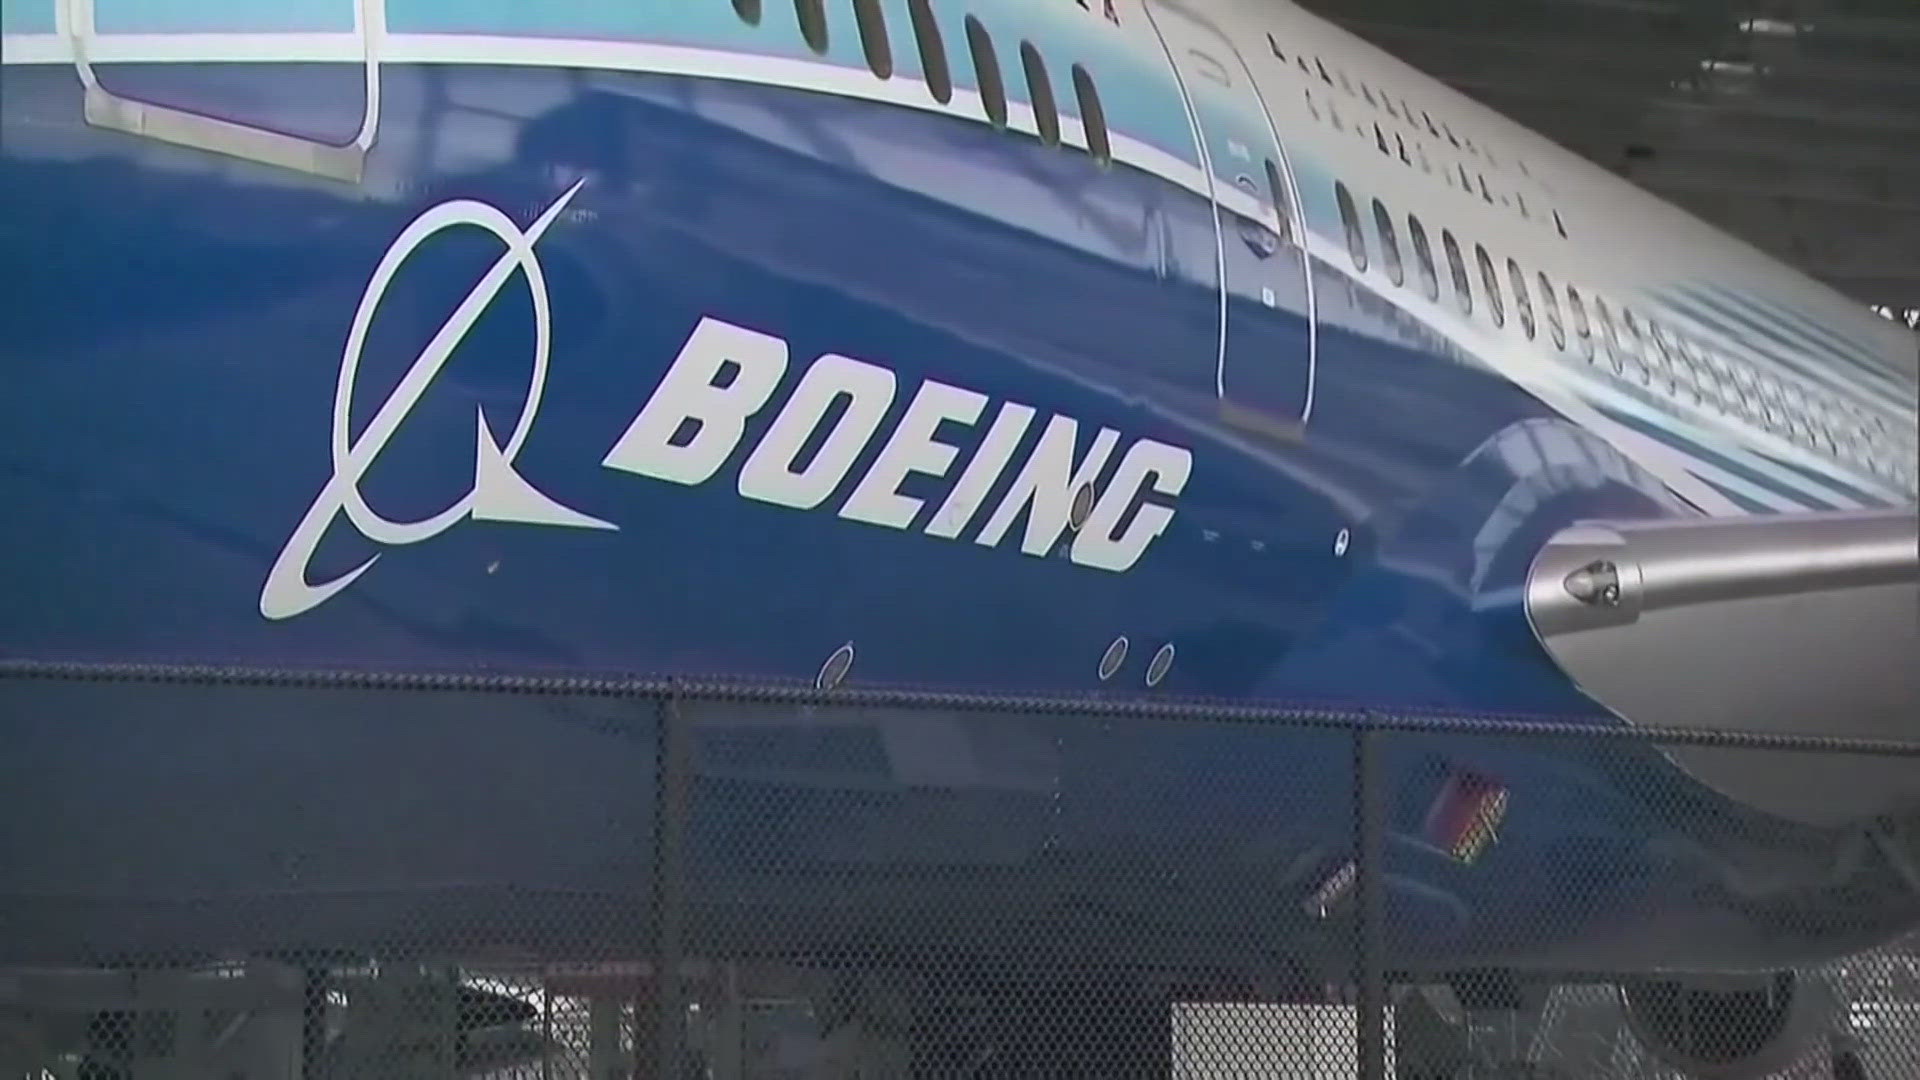 Despite the sanctions, Boeing won't face any financial punishment for discussing the investigation because the NTSB doesn't have the authority to issue a fine.